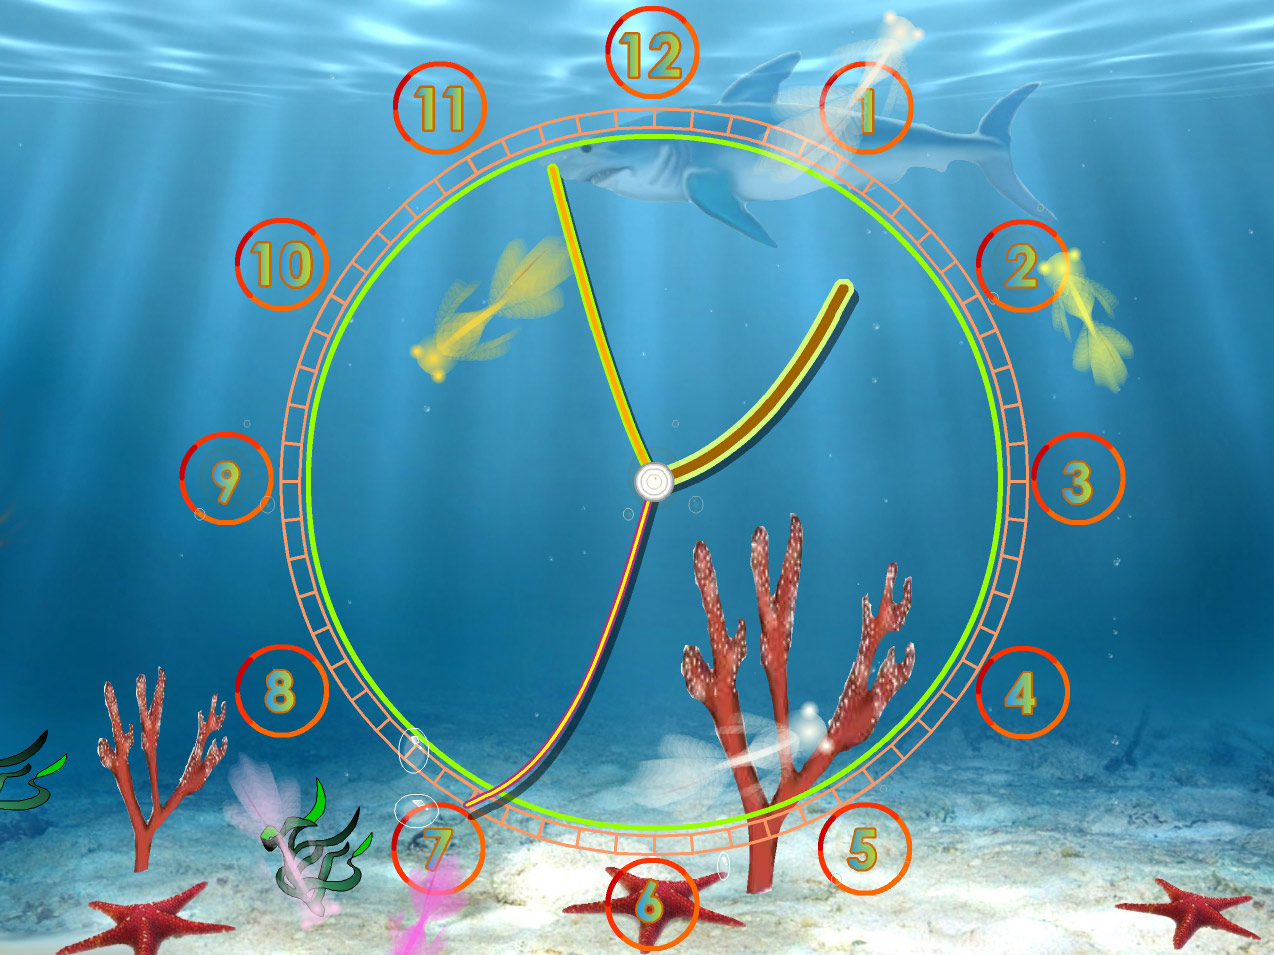 Aquarium Clock screensaver always know the current time with fun